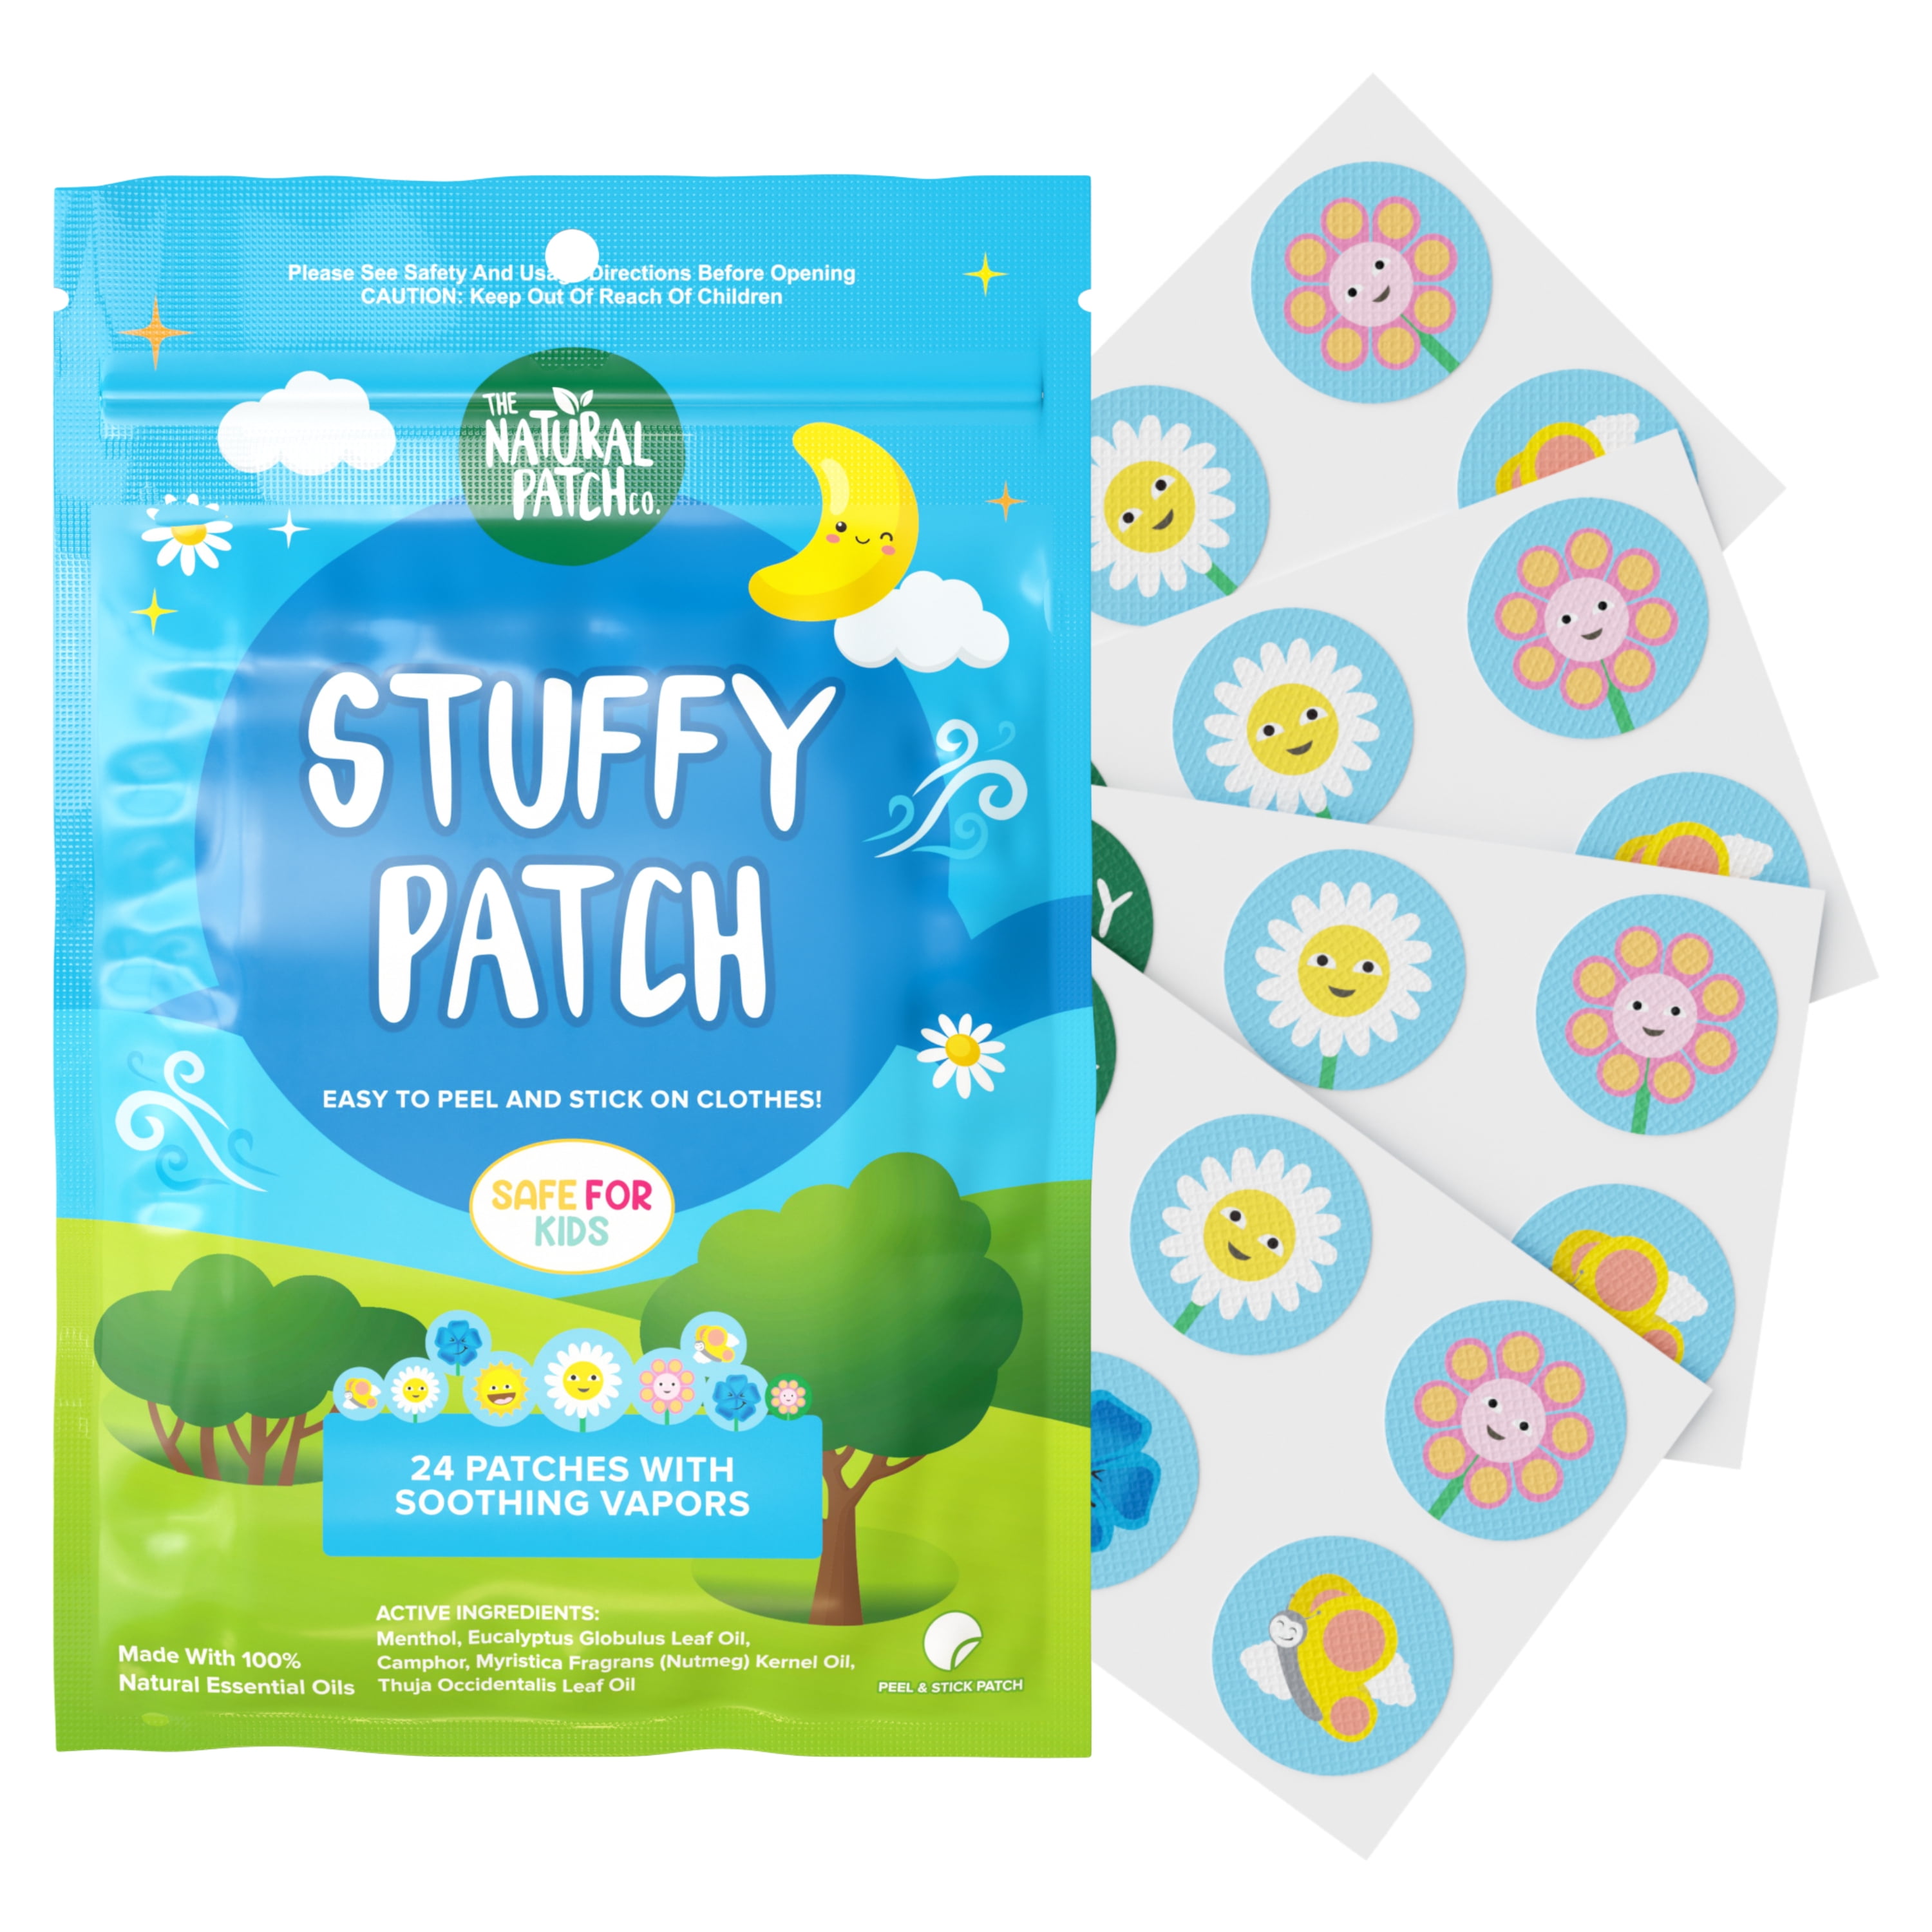 Henpk Deals Clearance Under 5 Party Patches 42 Pack For A Better Morning,  Party Natural Recovery Patches - Use Before Drinking, Enjoy No Regret Night  And Wake Up Refreshed,Skin-Friendly 